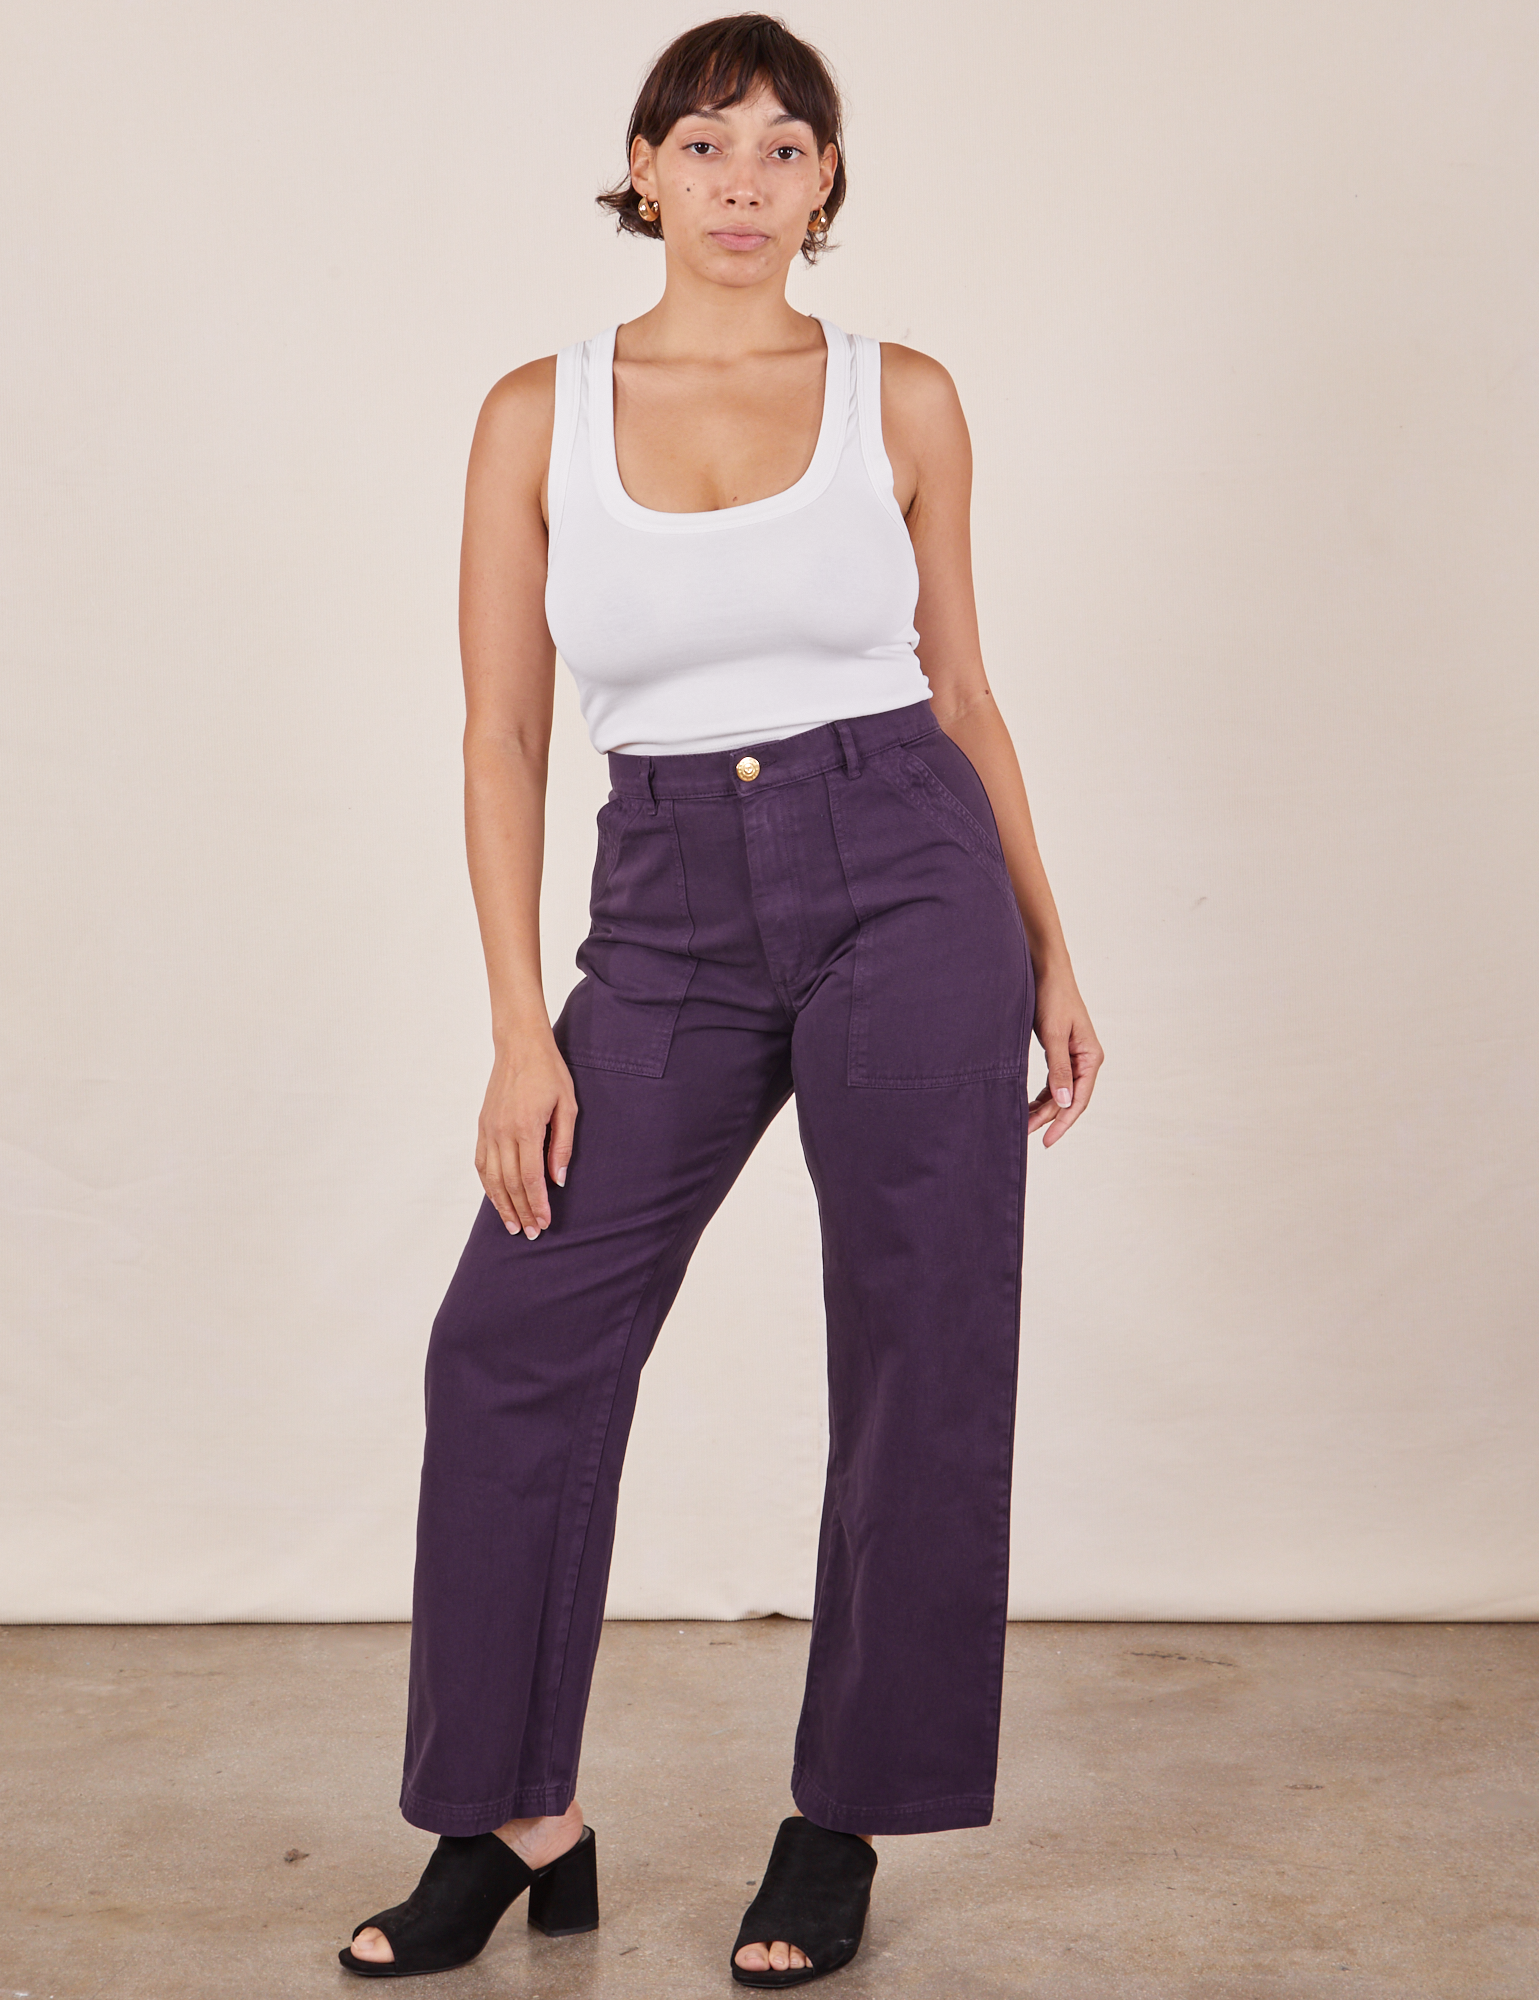 Tiara is 5'4" and wearing S Work Pants in Nebula Purple paired with vintage off-white Tank Top